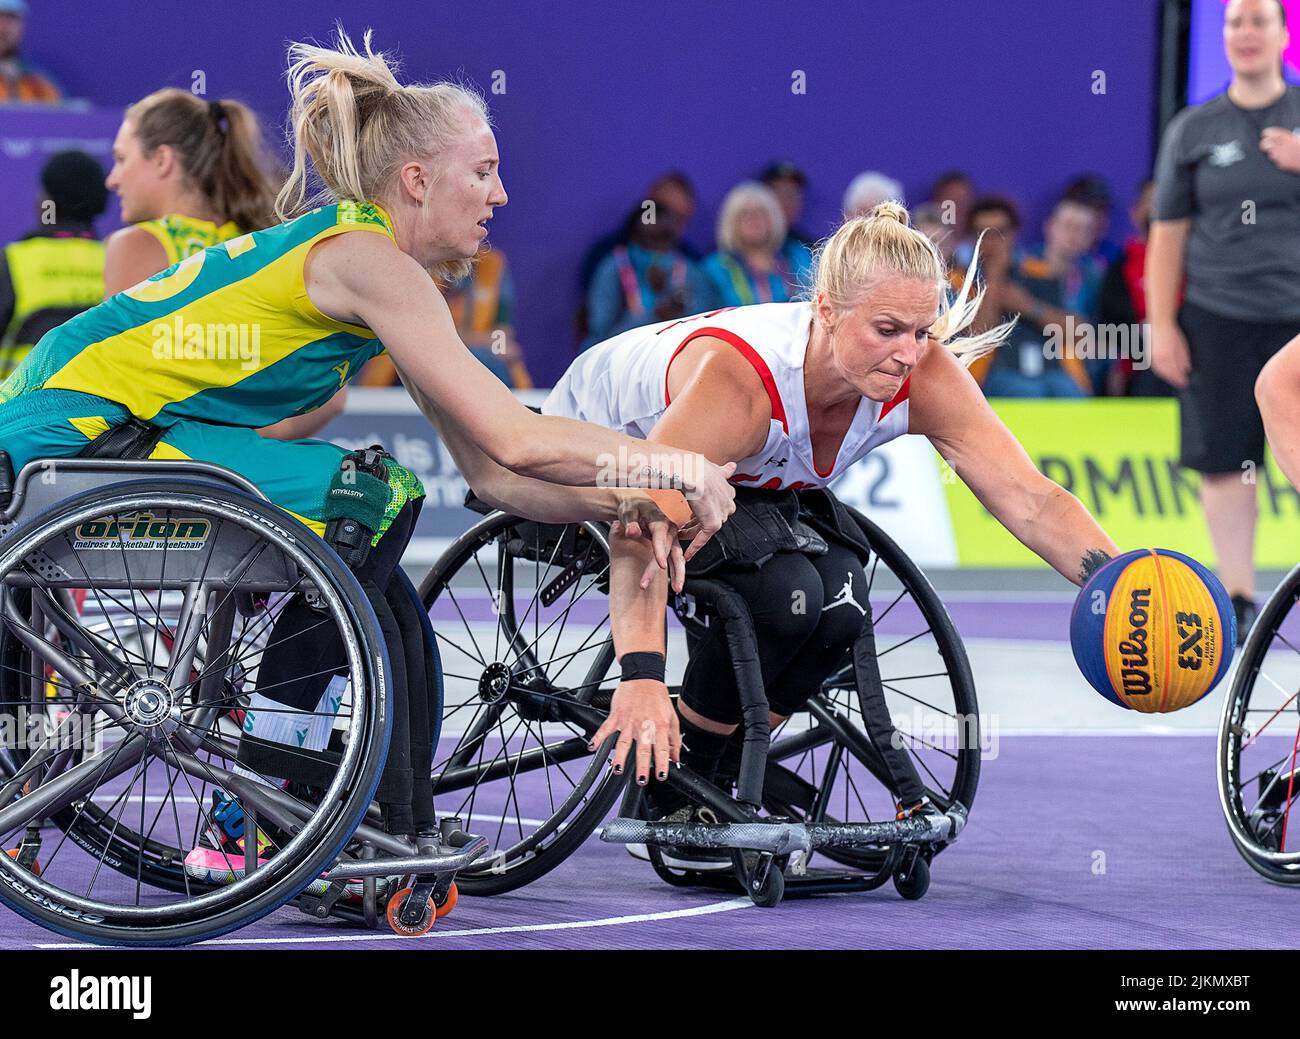 Birmingham, UK. 02nd Aug, 2022. Canada's Kady Dandeneau, right, is defended by Australia's Amber Merritt in 3 x 3 wheelchair basketball action at the Commonwealth Games in Birmingham, England on Tuesday, Aug. 2, 2022. Canada beat Australia 14-5 to win gold. Credit: The Canadian Press/Alamy Live News Stock Photo